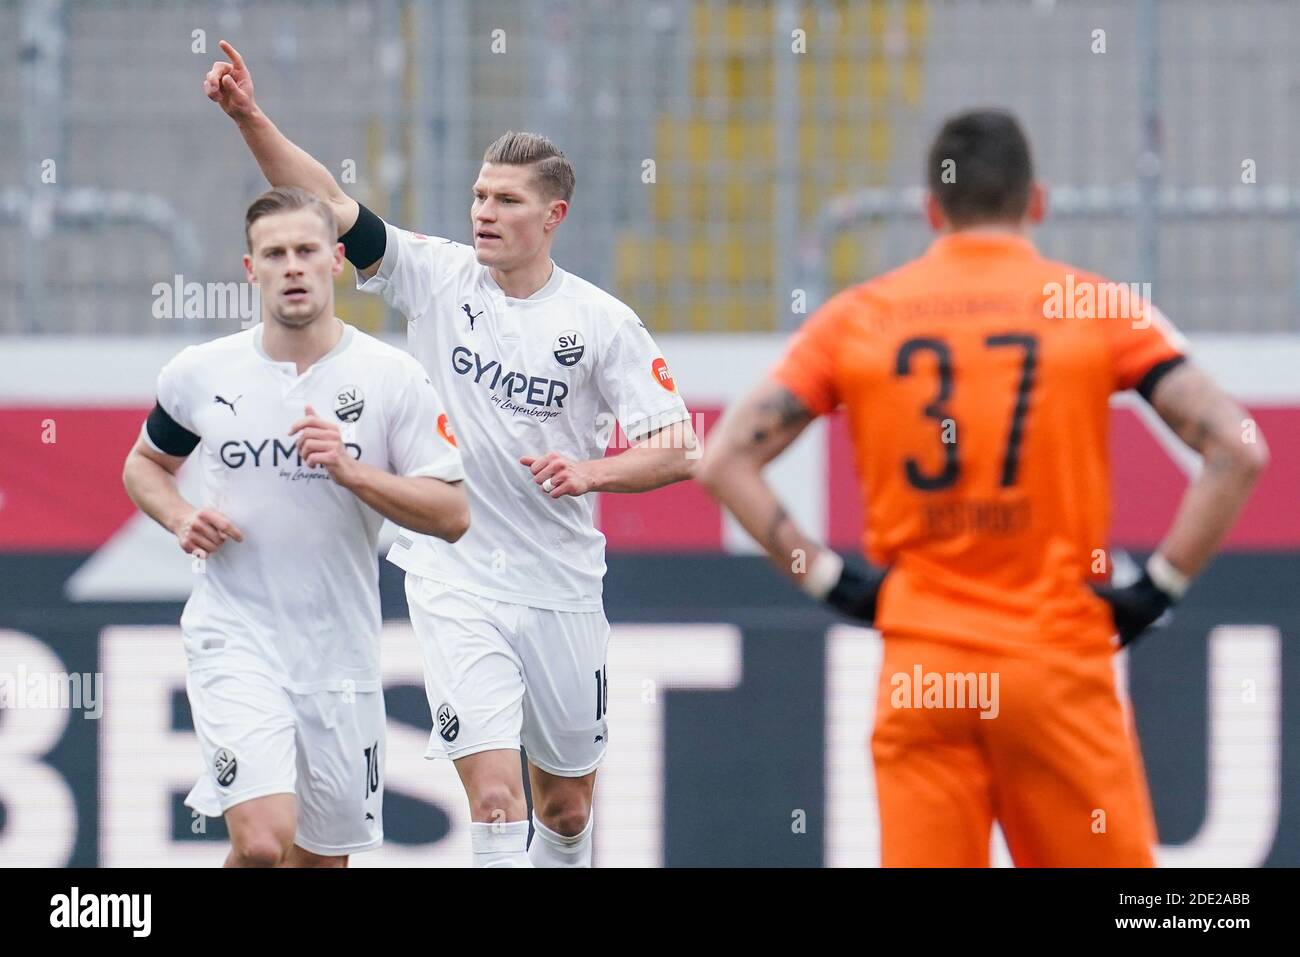 Sandhausen, Germany. 28th Nov, 2020. Football: 2nd Bundesliga, SV Sandhausen - FC Erzgebirge Aue, 9th matchday, Hardtwaldstadion. Sandhausen's goal scorer Kevin Behrens (r) cheers with Sandhausen's Julius Biada over the penalty goal for the 1:0. Credit: Uwe Anspach/dpa - IMPORTANT NOTE: In accordance with the regulations of the DFL Deutsche Fußball Liga and the DFB Deutscher Fußball-Bund, it is prohibited to exploit or have exploited in the stadium and/or from the game taken photographs in the form of sequence images and/or video-like photo series./dpa/Alamy Live News Stock Photo